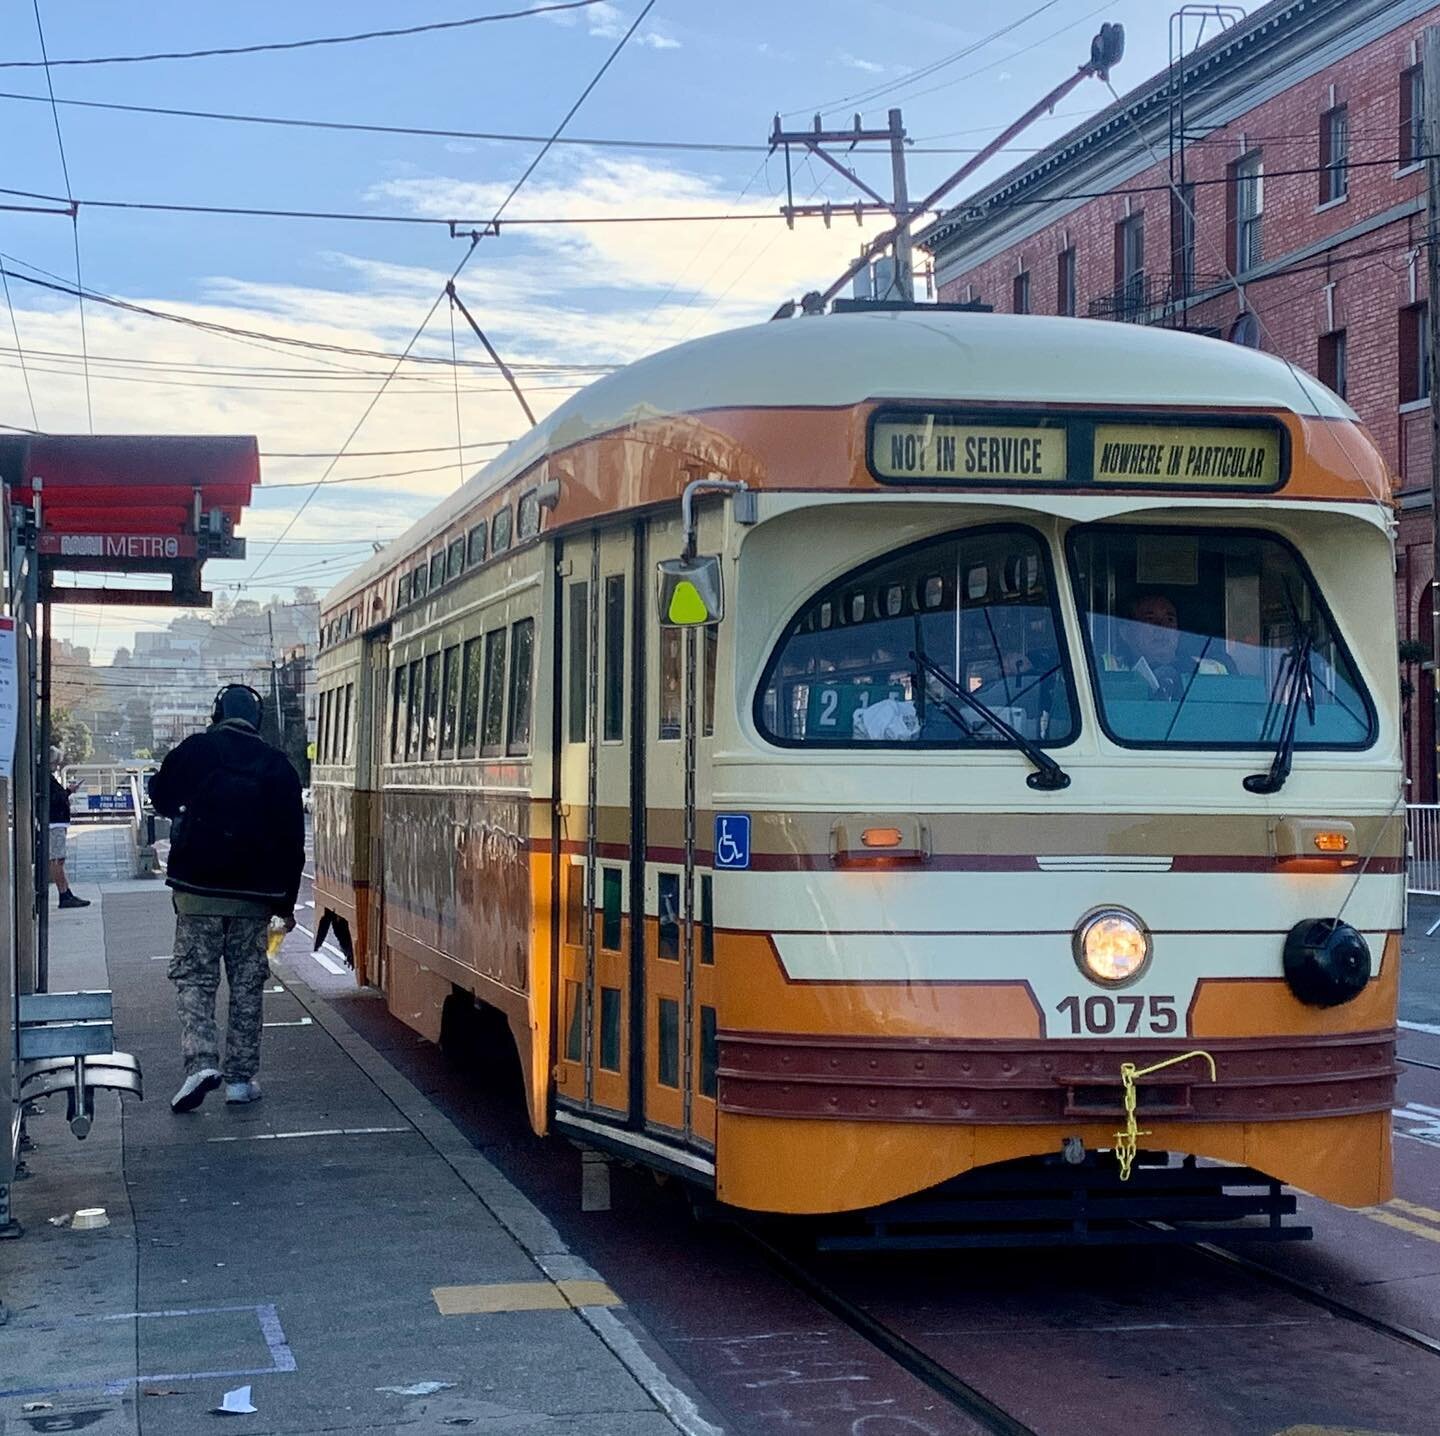 We&rsquo;re excited to see @sfmtaphoto getting ready to resume rail service, with the J-Church scheduled to start running again from Dec 19th. To ease crowding in the subway the J will no longer go underground and will instead terminate at Church &am